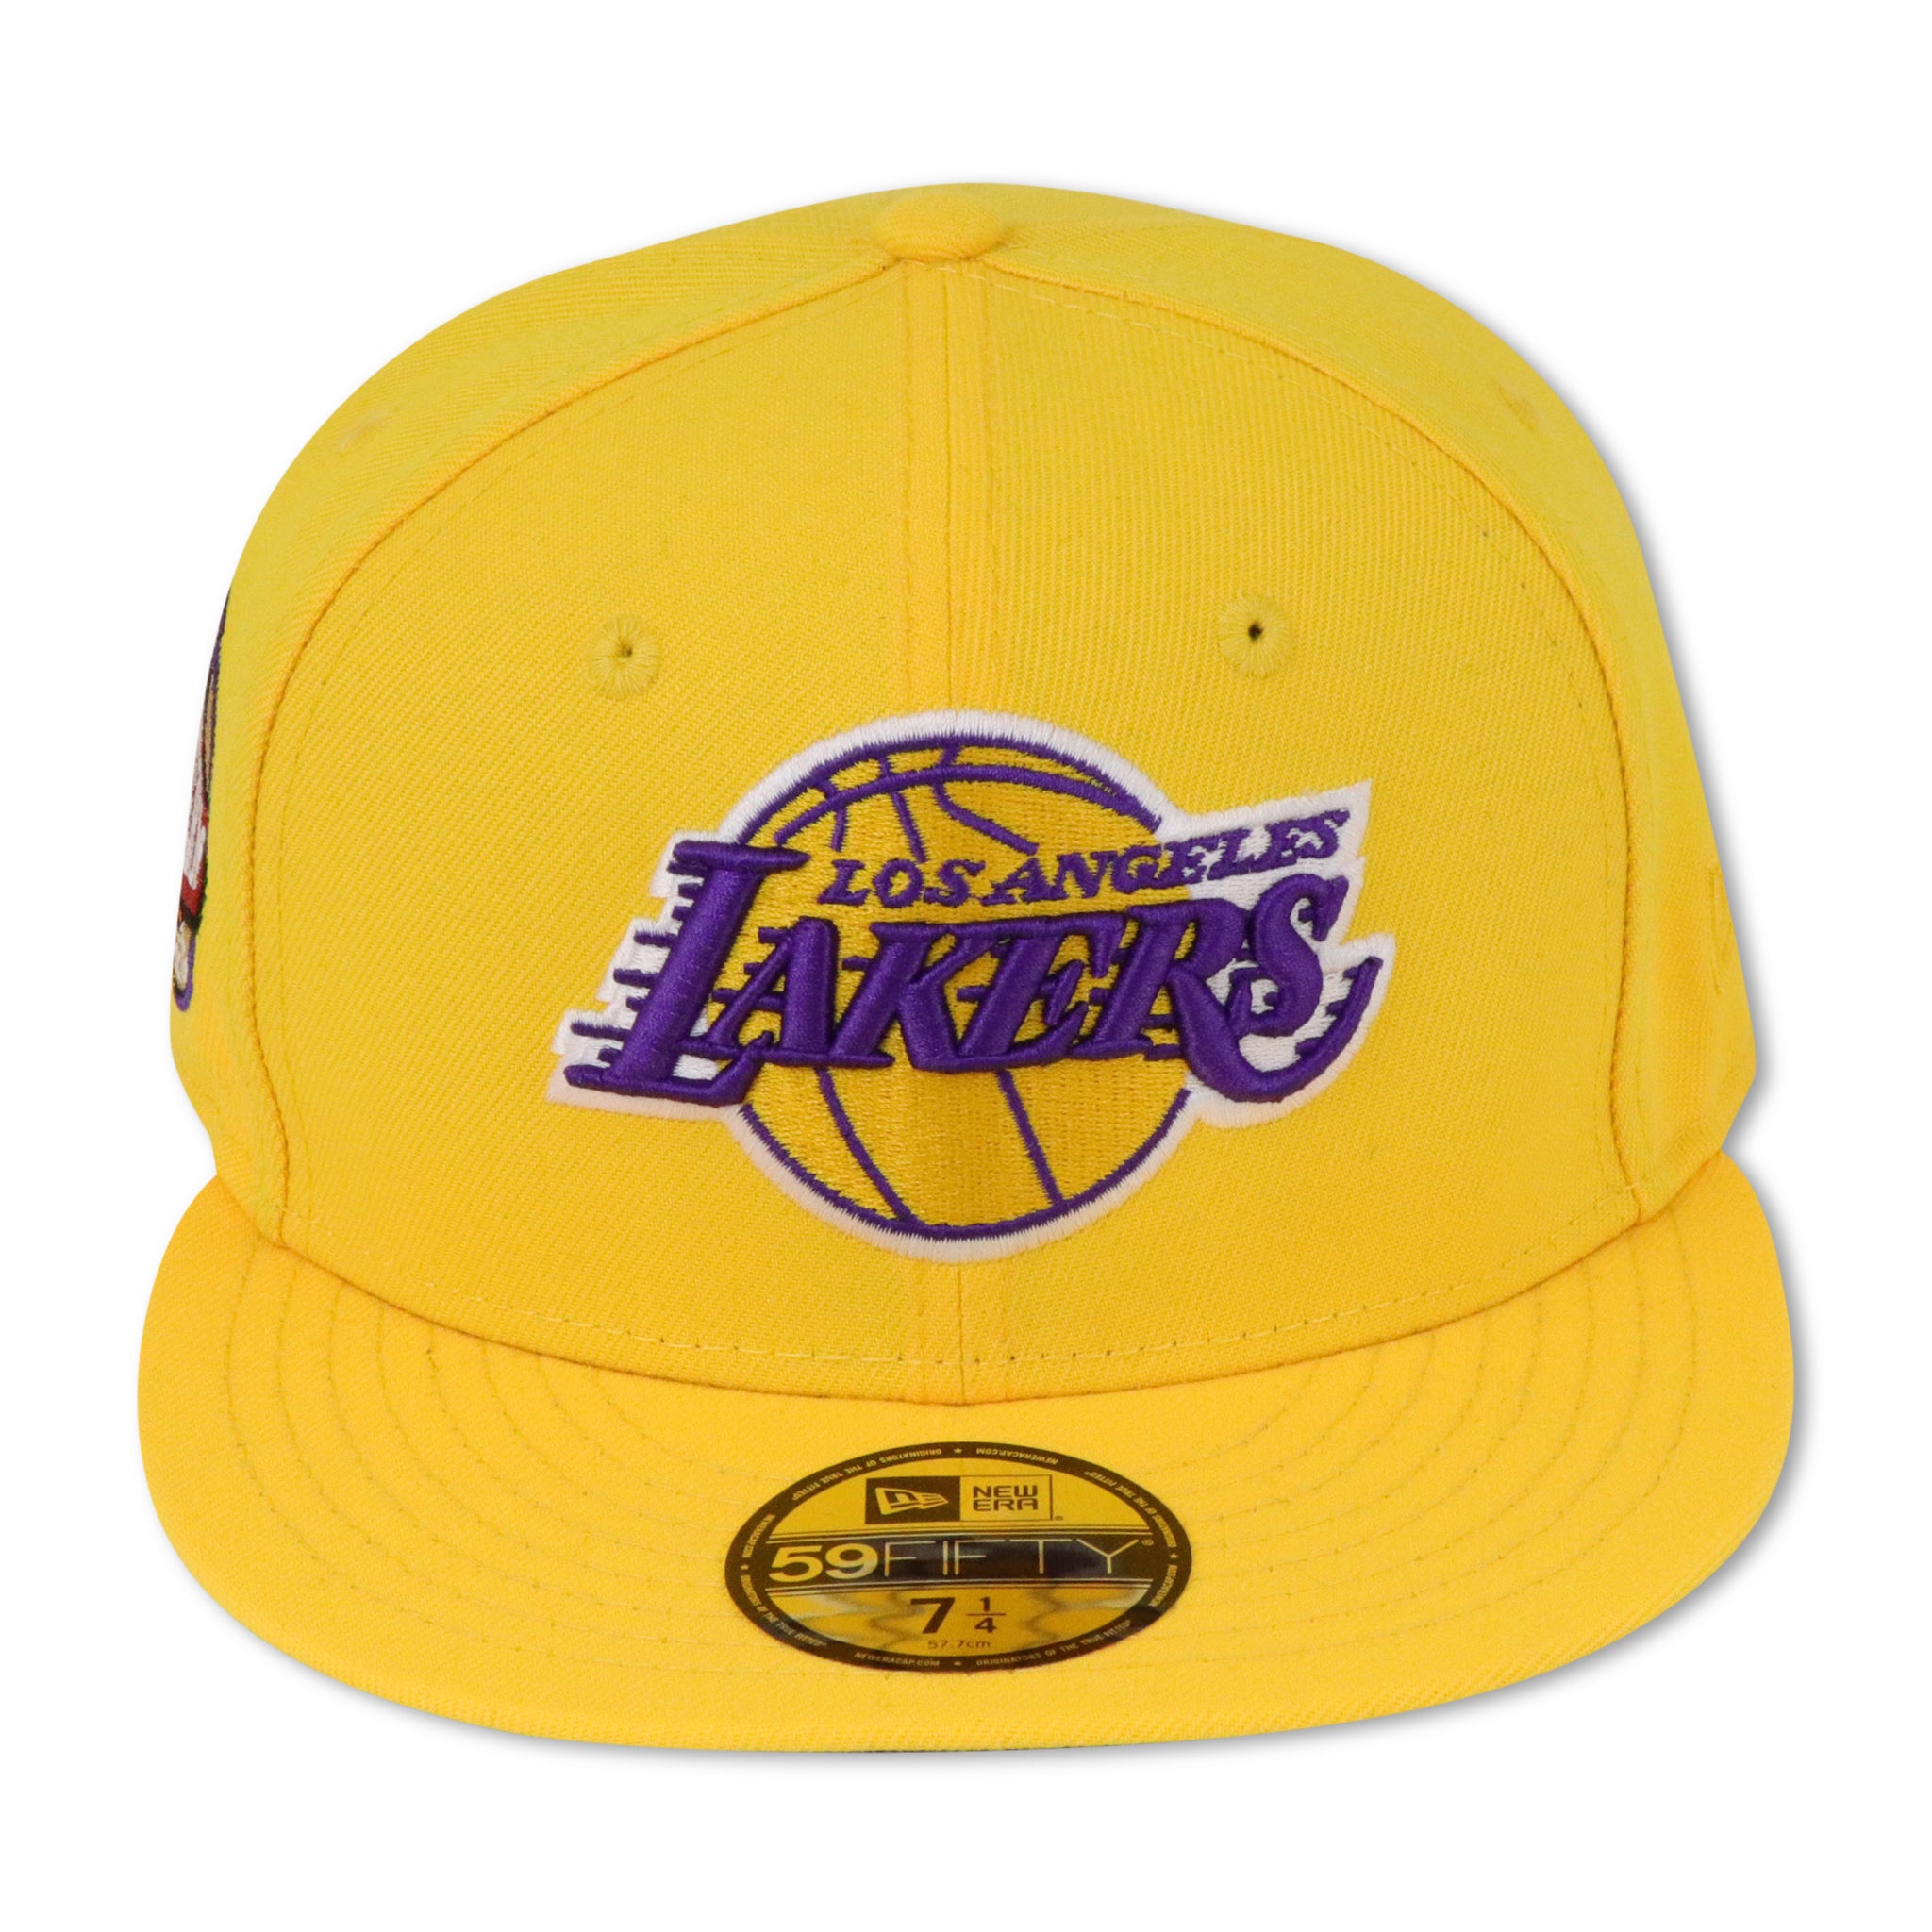 LOS ANGELES LAKERS "WESTERN CONFERENCE" NEW ERA 59FIFTY FITTED (PURPLE BOTTOM)